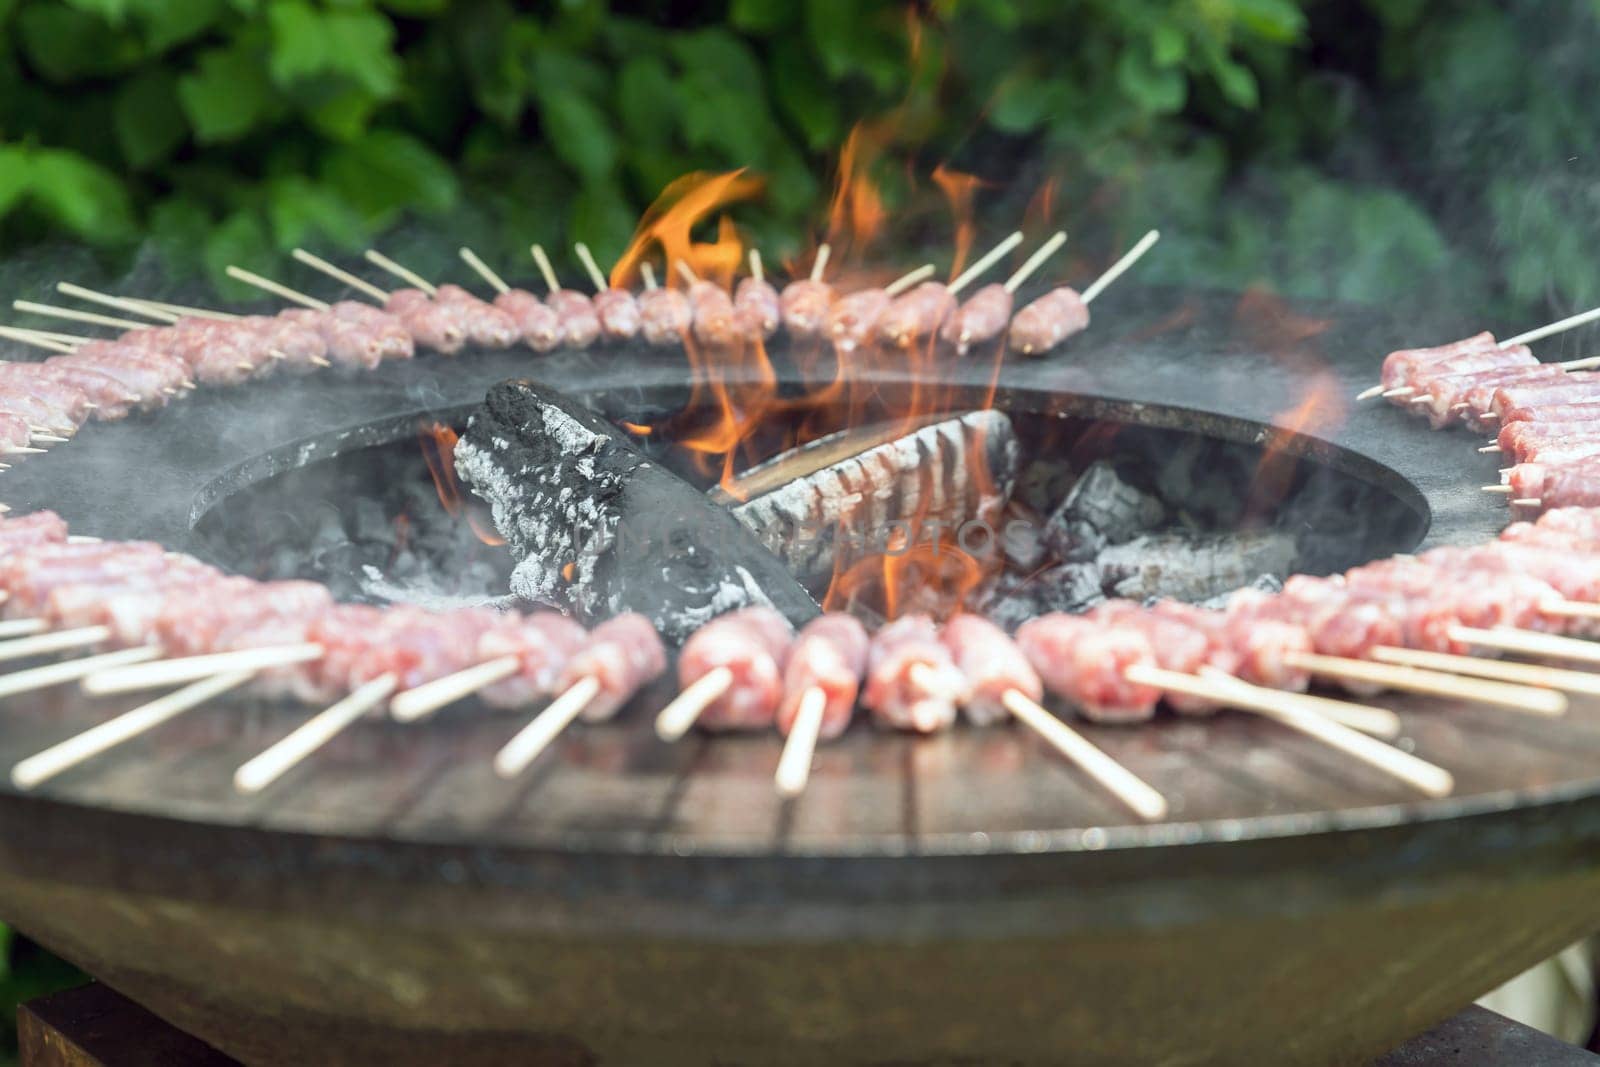 Sausage cooking on a wood brazier by germanopoli